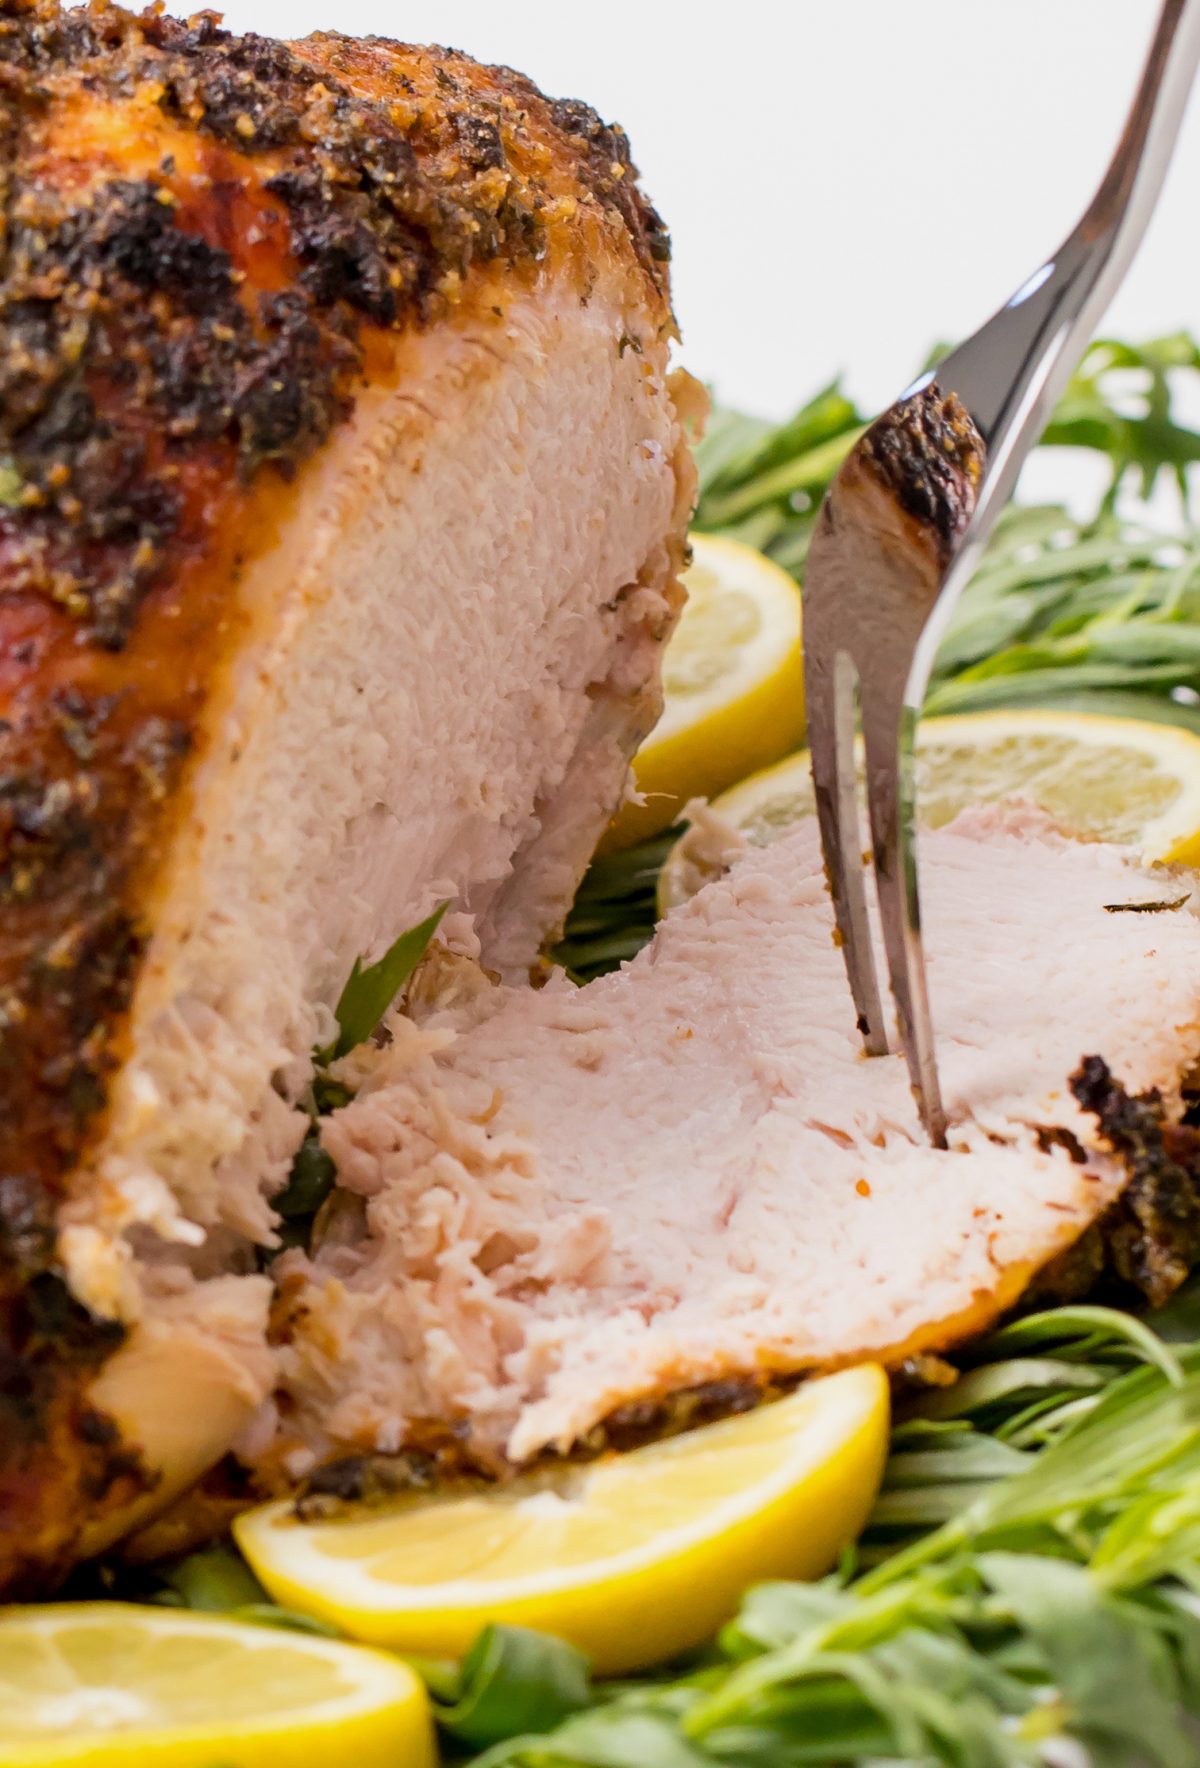 Tender and juicy grilled turkey breast - cutting a plated grilled turkey with sauce on on a bed of grass and lemons on a white table using a knife and fork